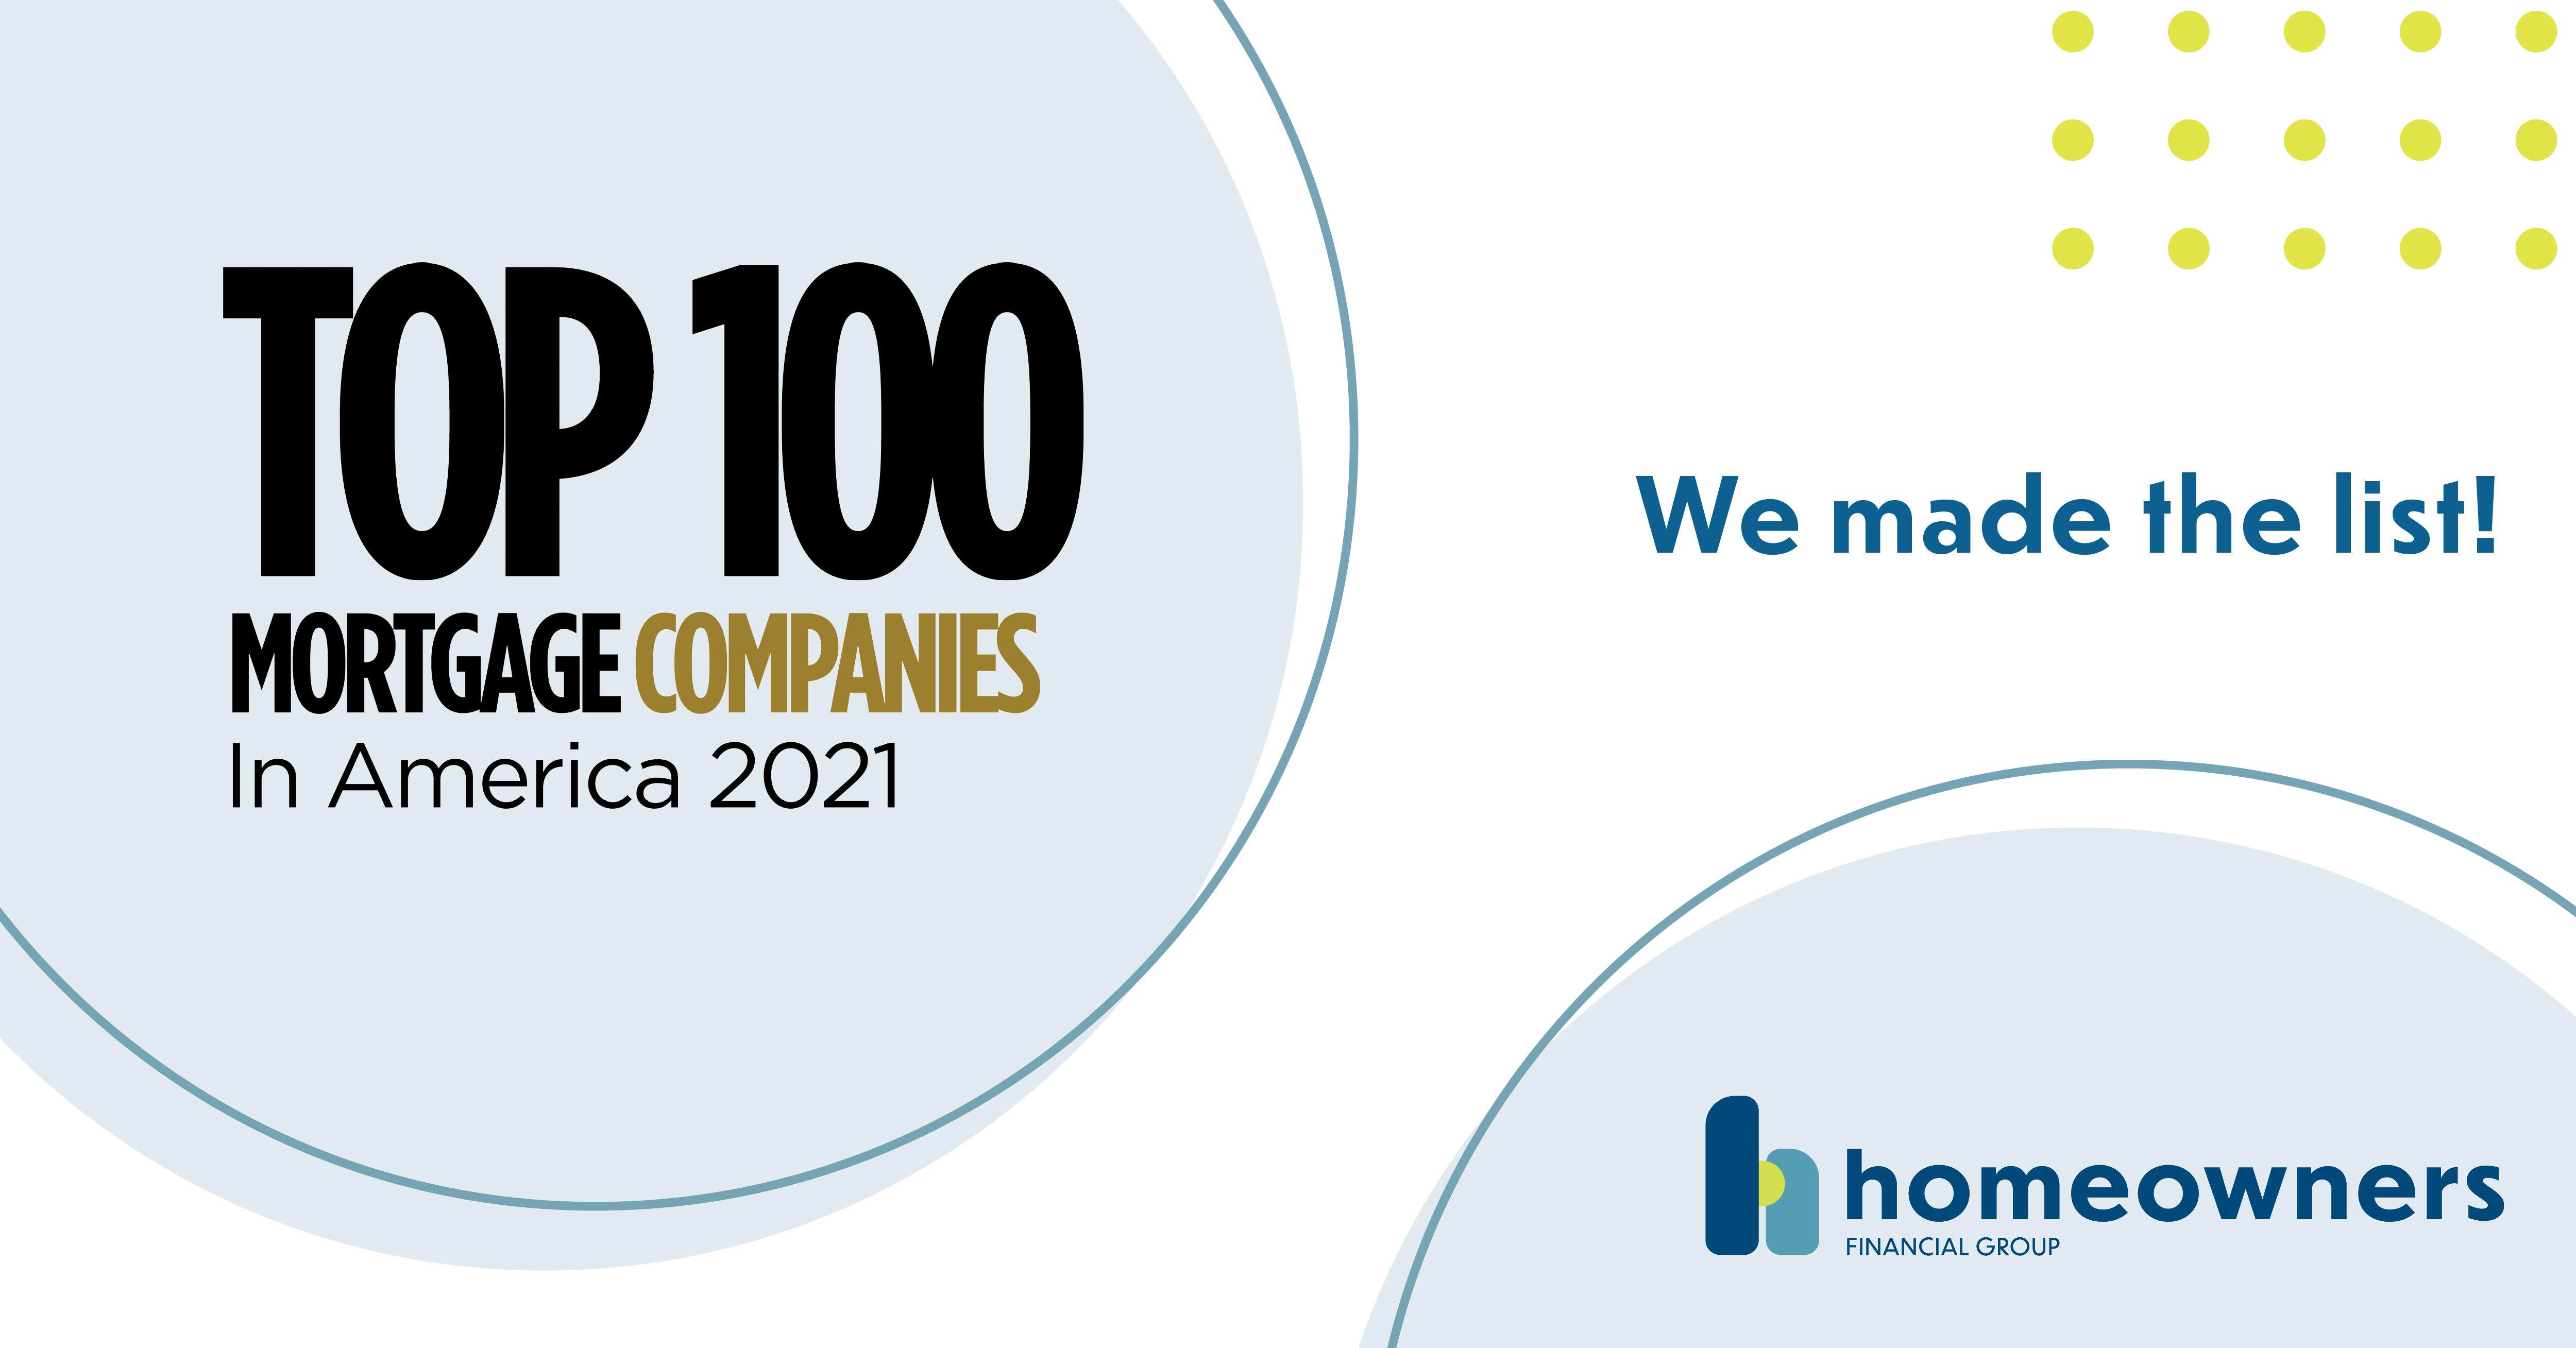 Homeowners Financial Group Ranks Among the Top 100 Mortgage Companies in America for 2021